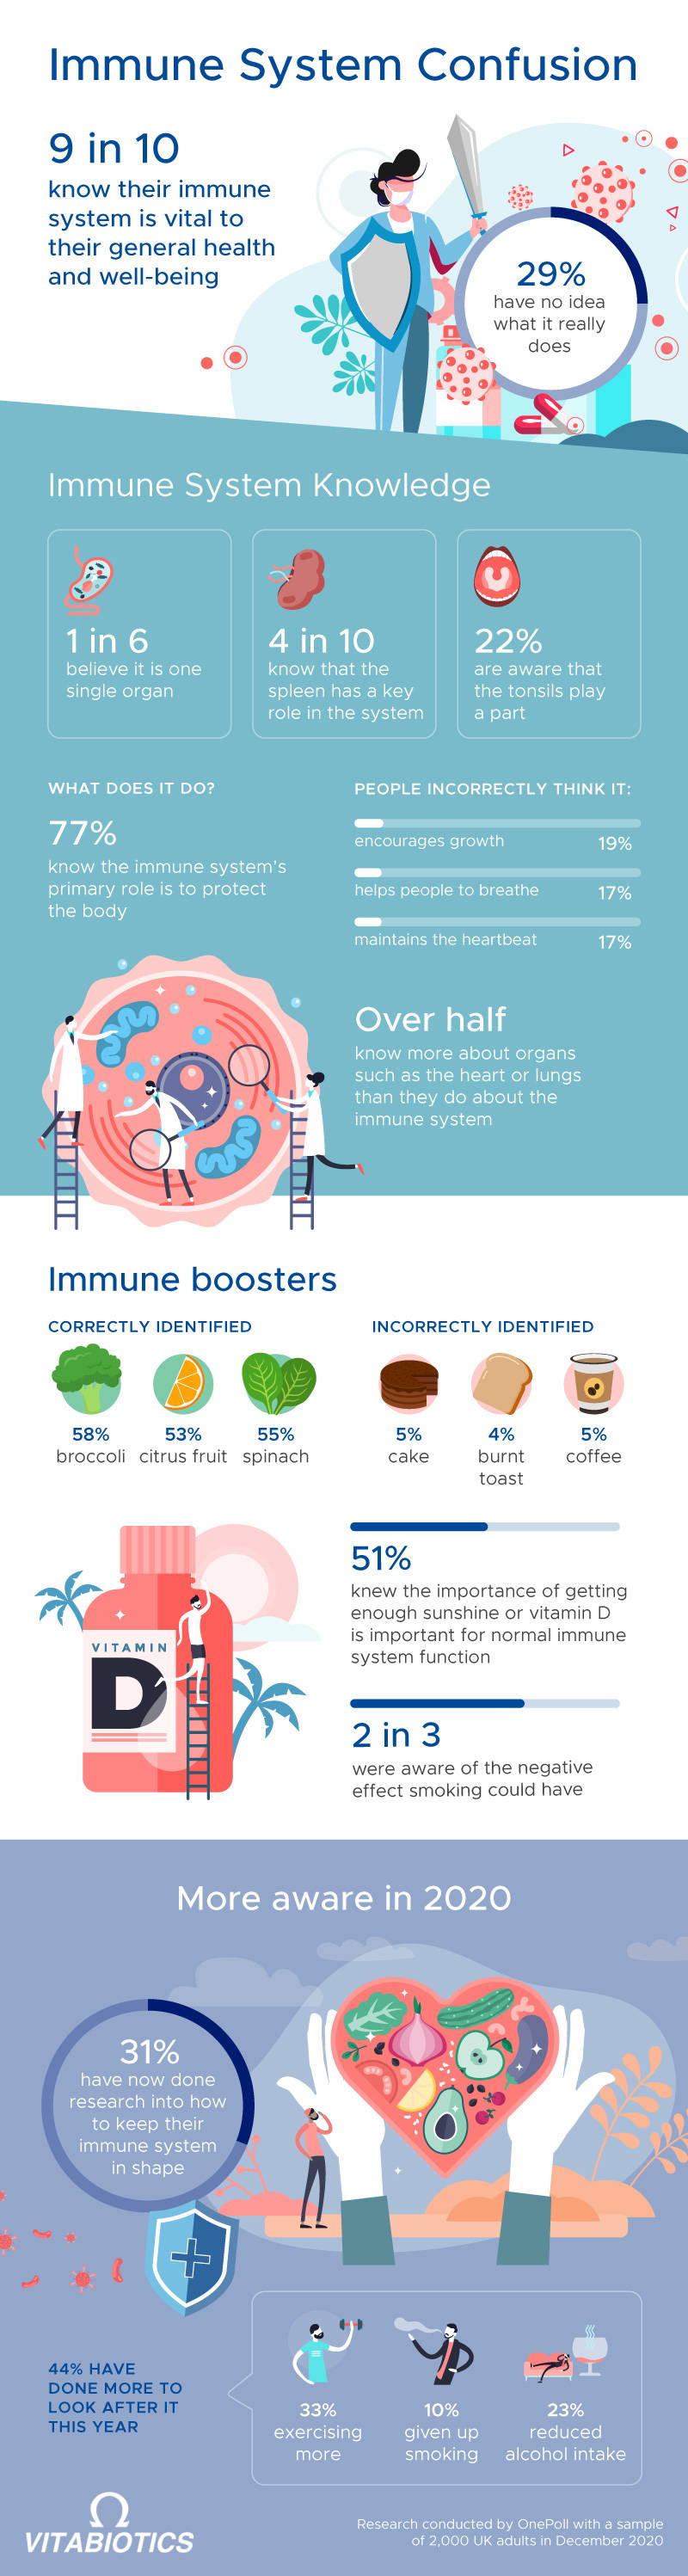 Infographic About Immune System Confusion